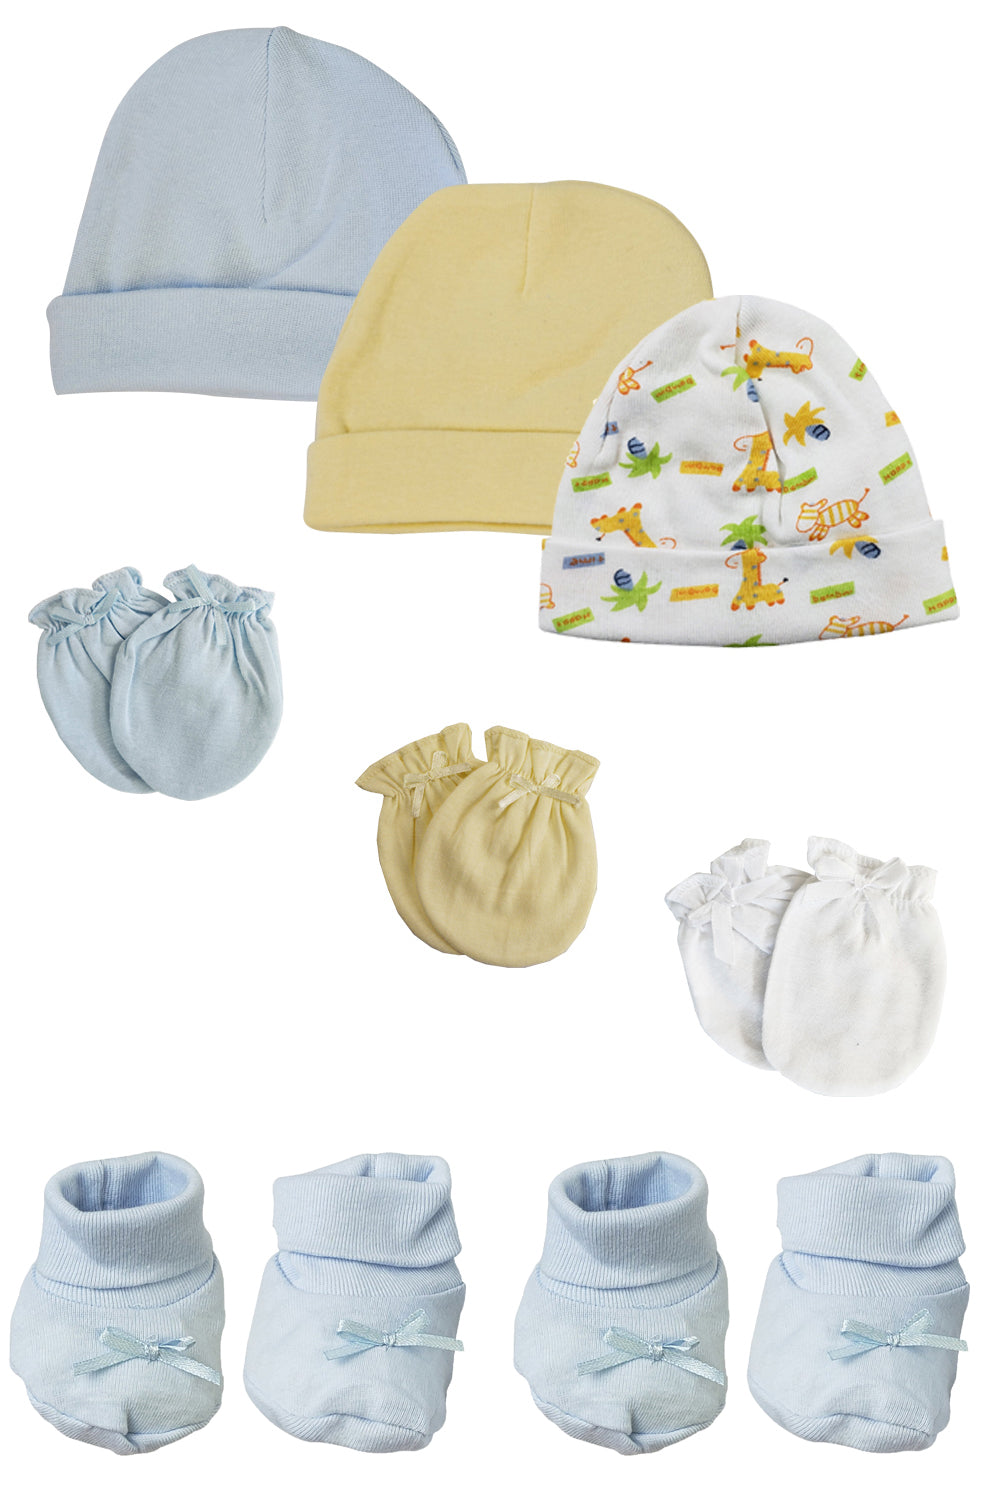 Preemie Baby Boy Caps with Infant Mittens and Booties - 8 Pack NC_0214